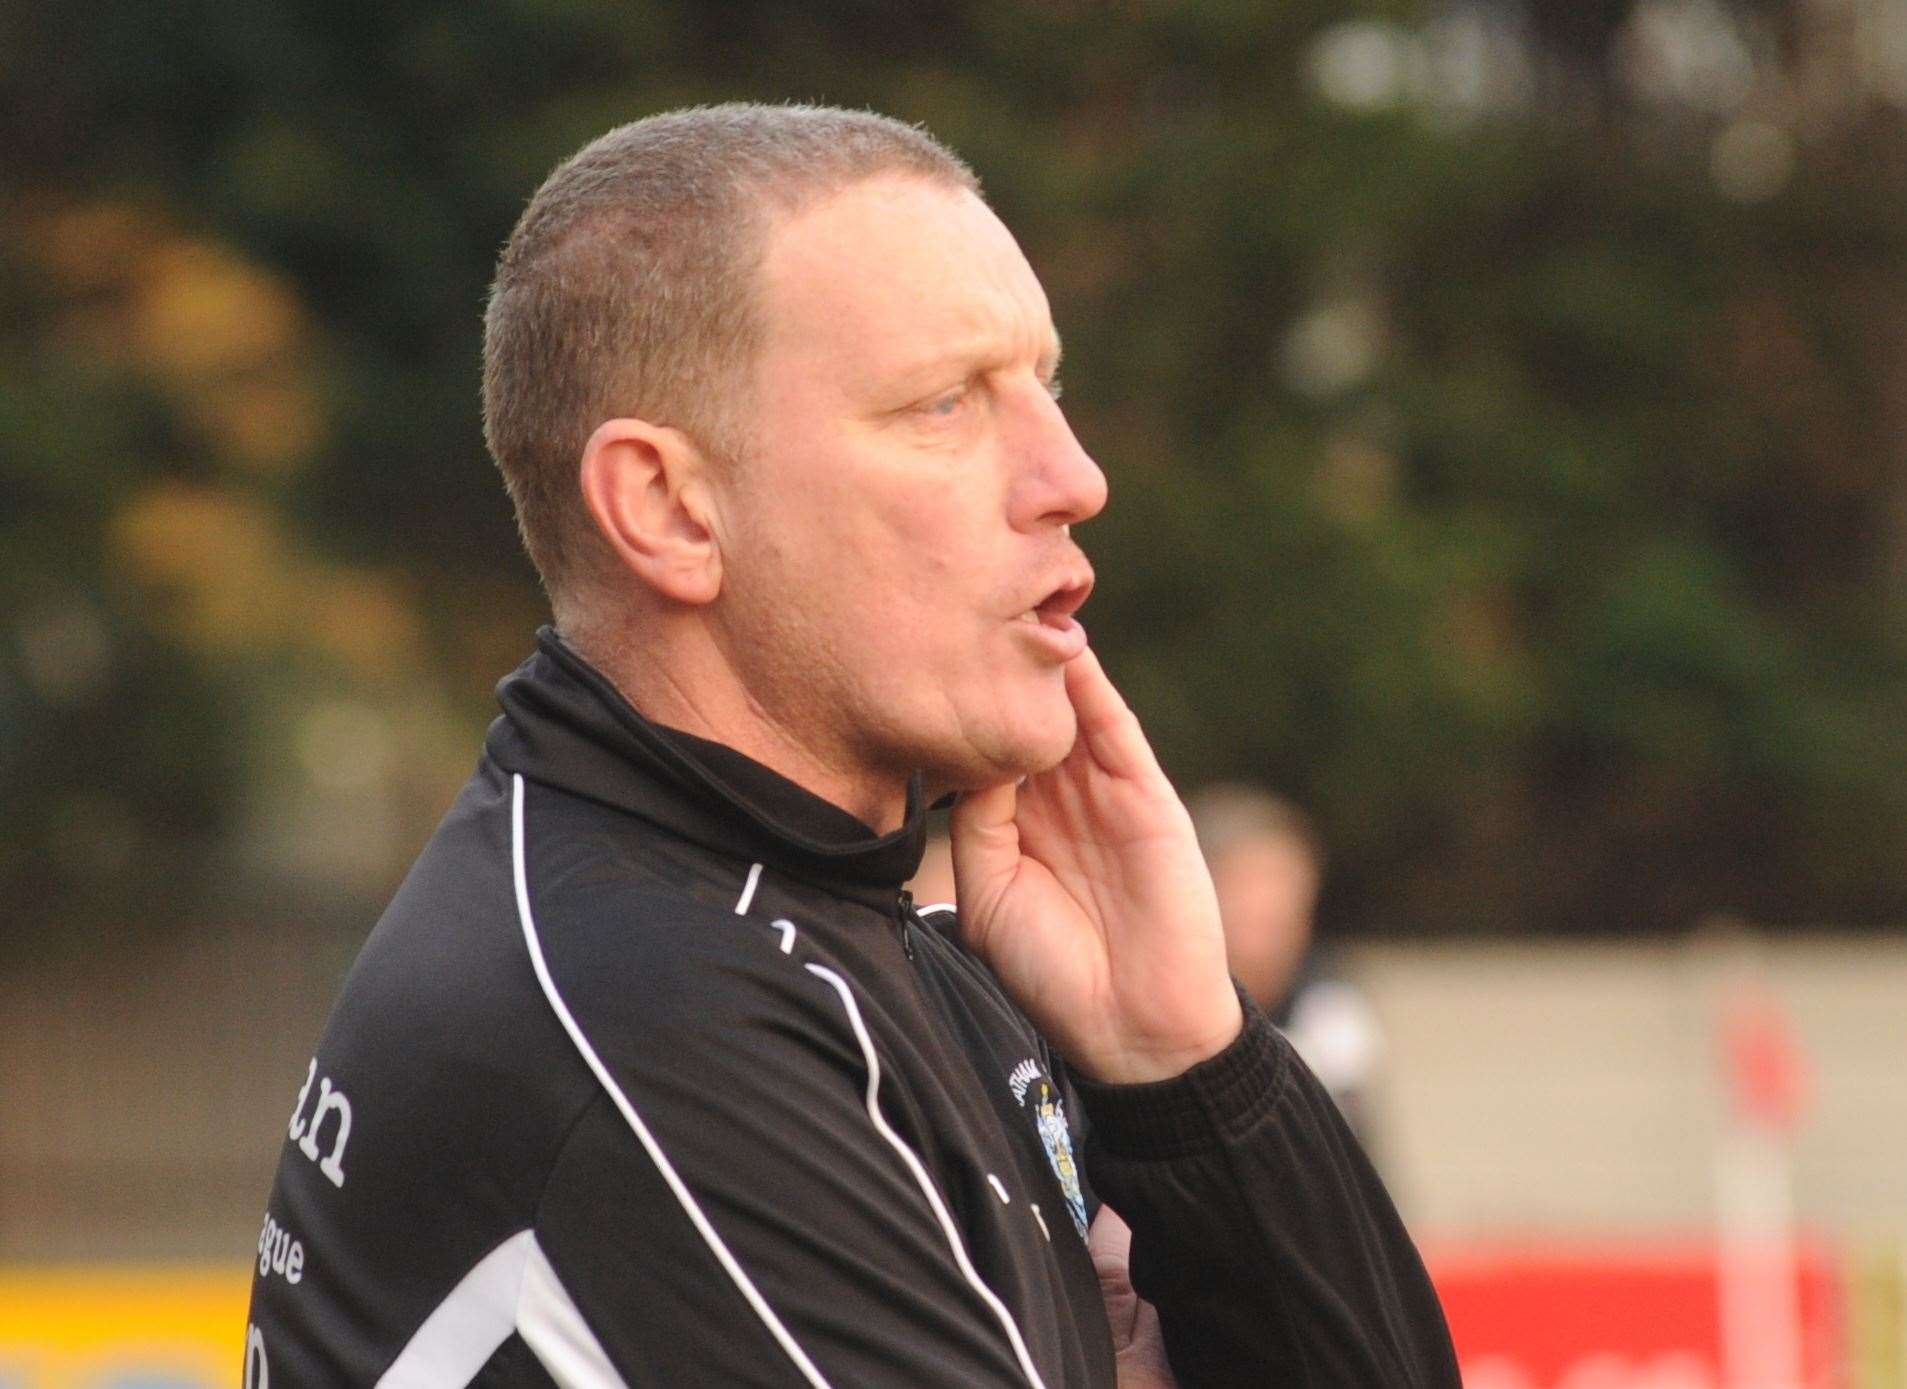 Paul Piggott is back in charge for the rest of the season at Hollands & Blair